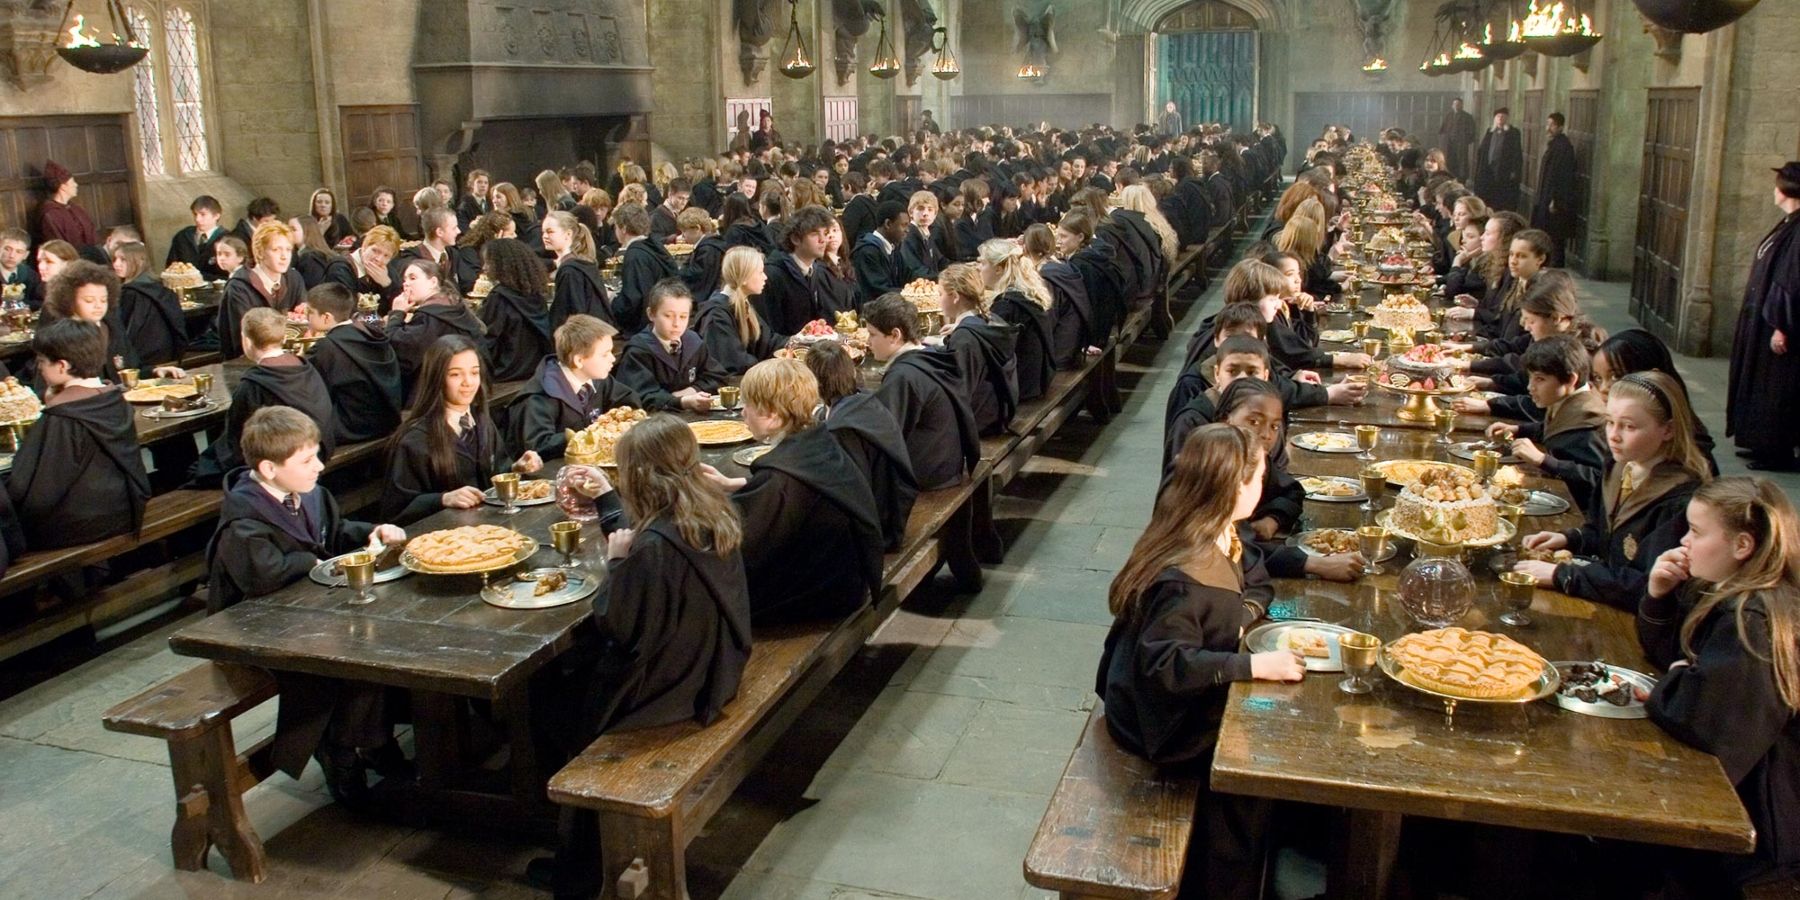 Students in the Great Hall in Hogwarts in Harry Potter